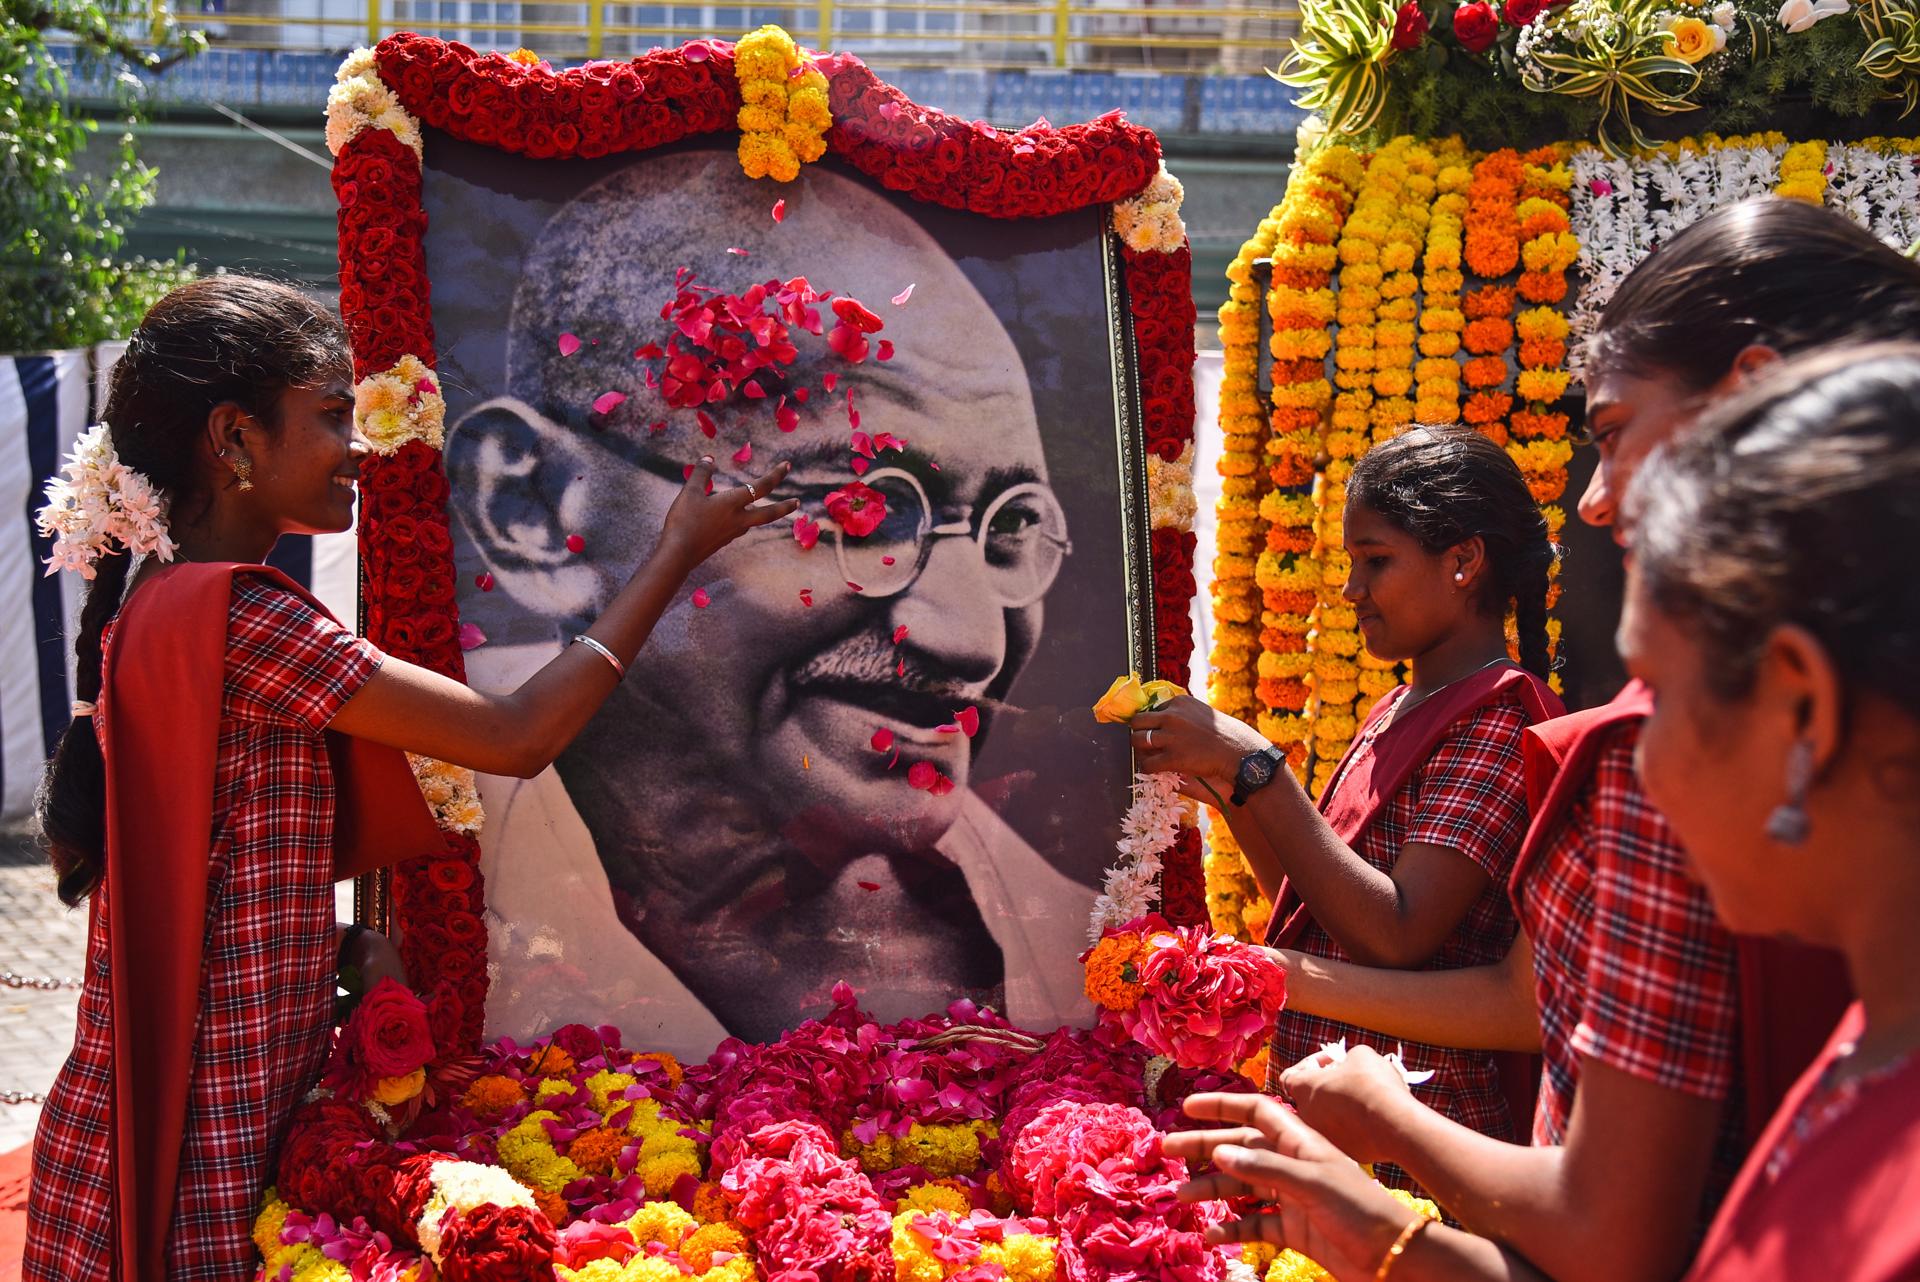 Chennai (India), 02/10/2023.- School students pay a floral tribute to a portrait of Mohandas Karamchand Gandhi to mark his 154th birth anniversary on the occasion of Gandhi Jayanti, at Egmore Museum, in Chennai, India, 02 October 2023. Gandhi Jayanti is celebrated annually across India on 02 October, to mark the birthday of Mohandas Karamchand Gandhi. This year marks the 154th birth anniversary of Mahatma Gandhi, also known as the father of the Indian nation. EFE/EPA/IDREES MOHAMMED coverage code 28943